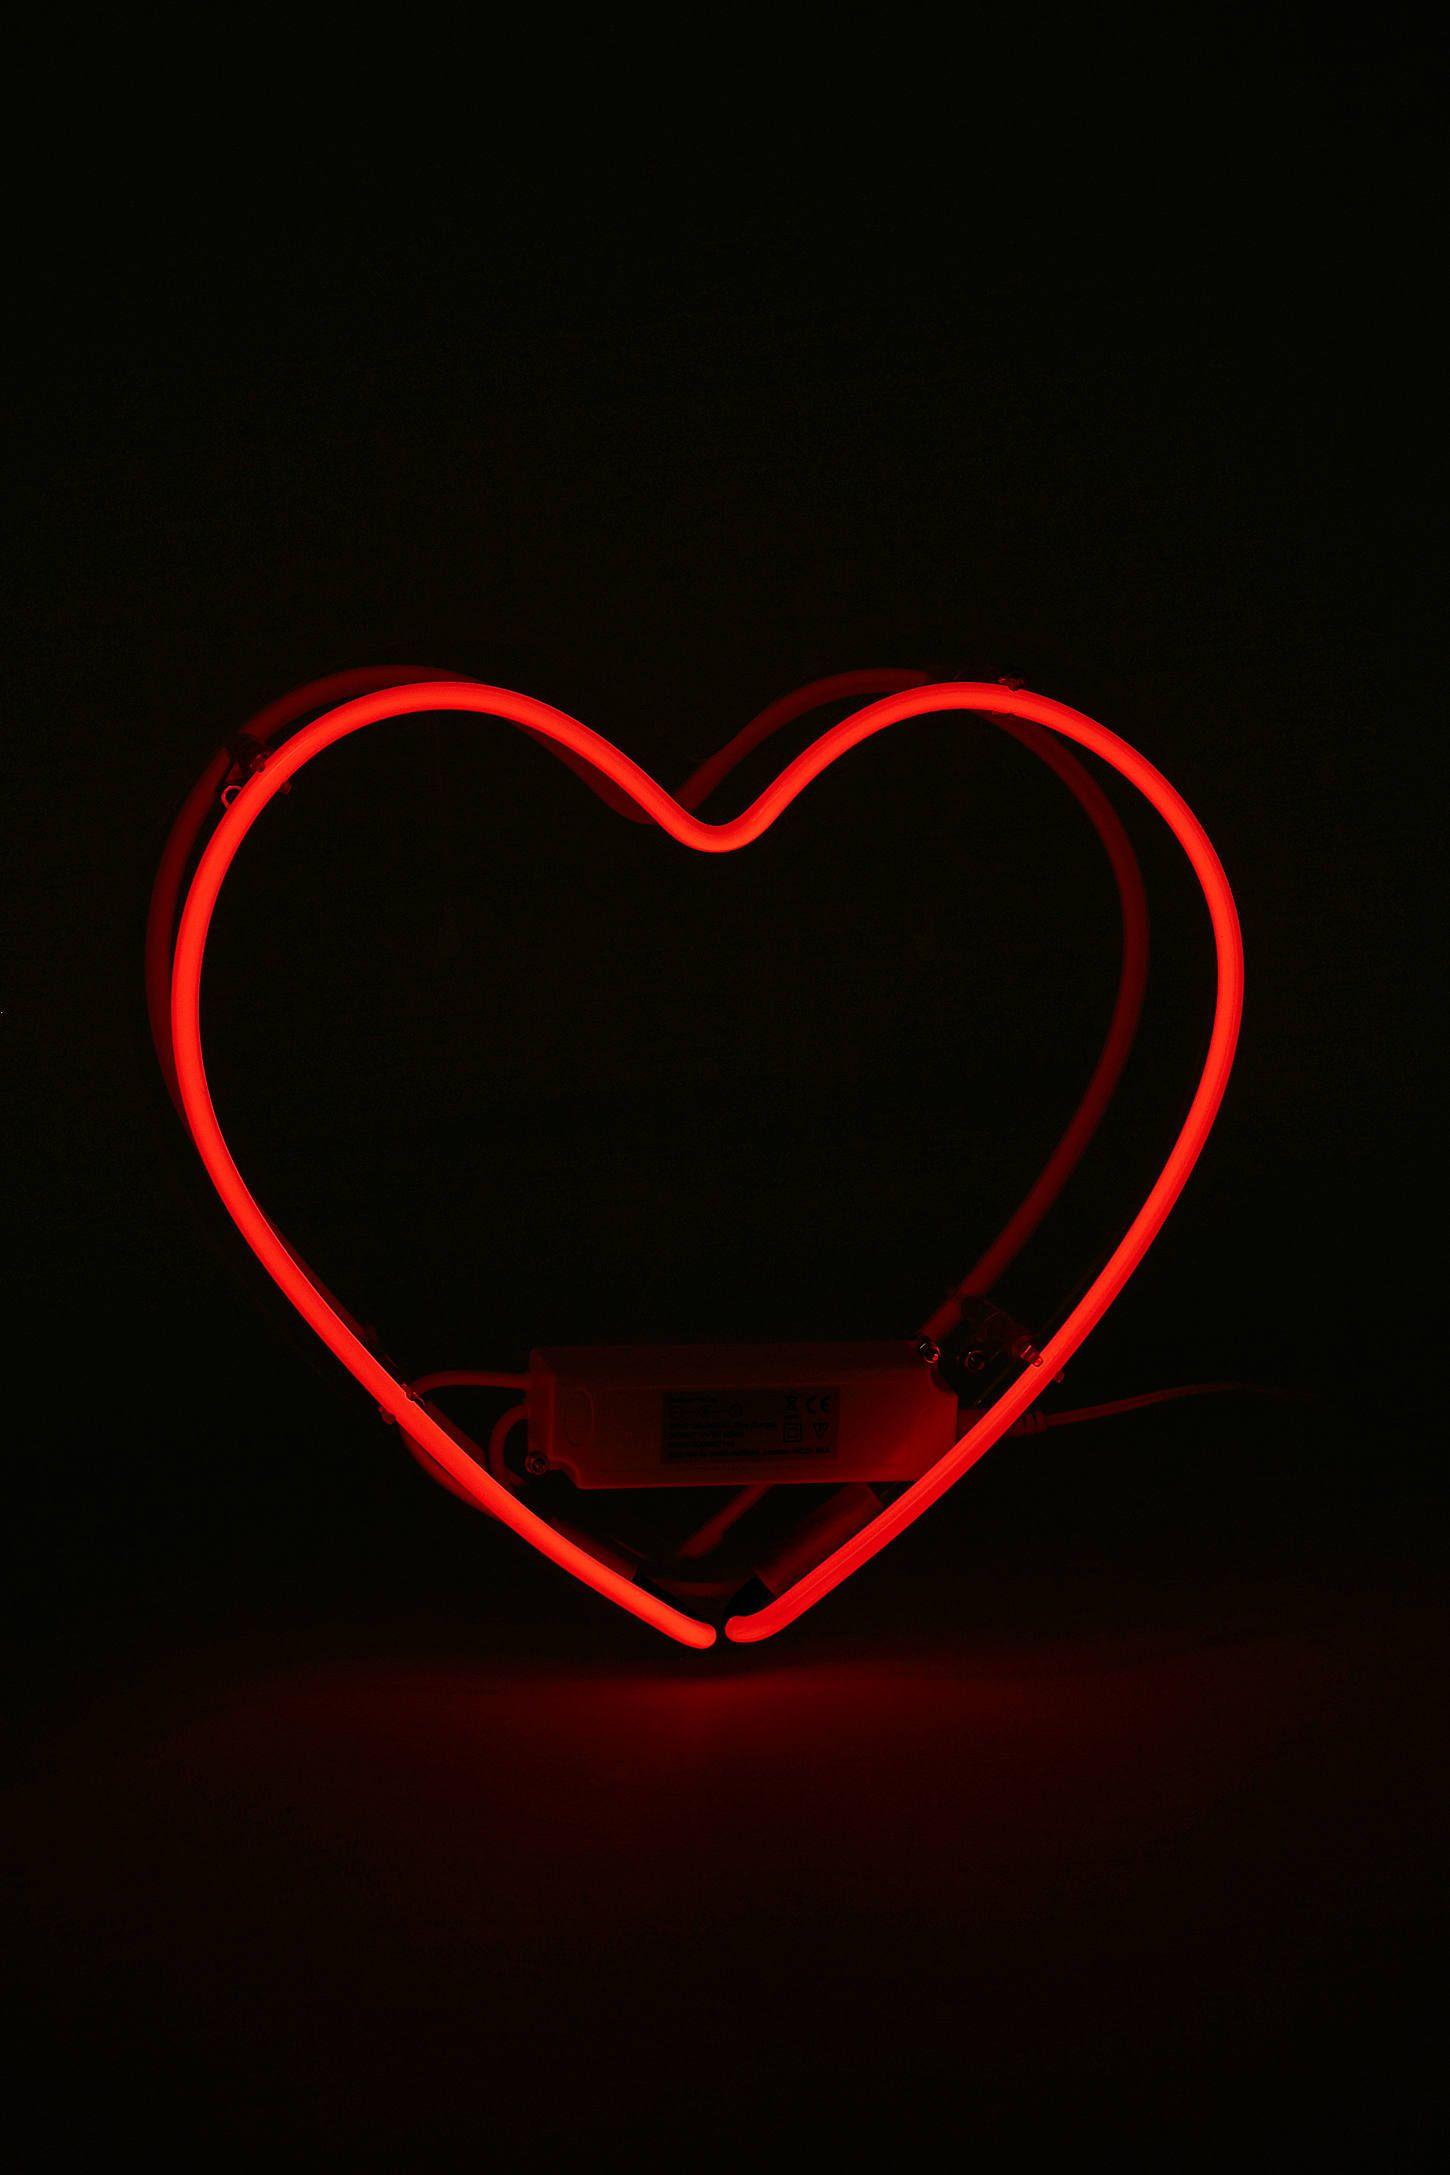 A red heart shaped light is on - Light red, neon red